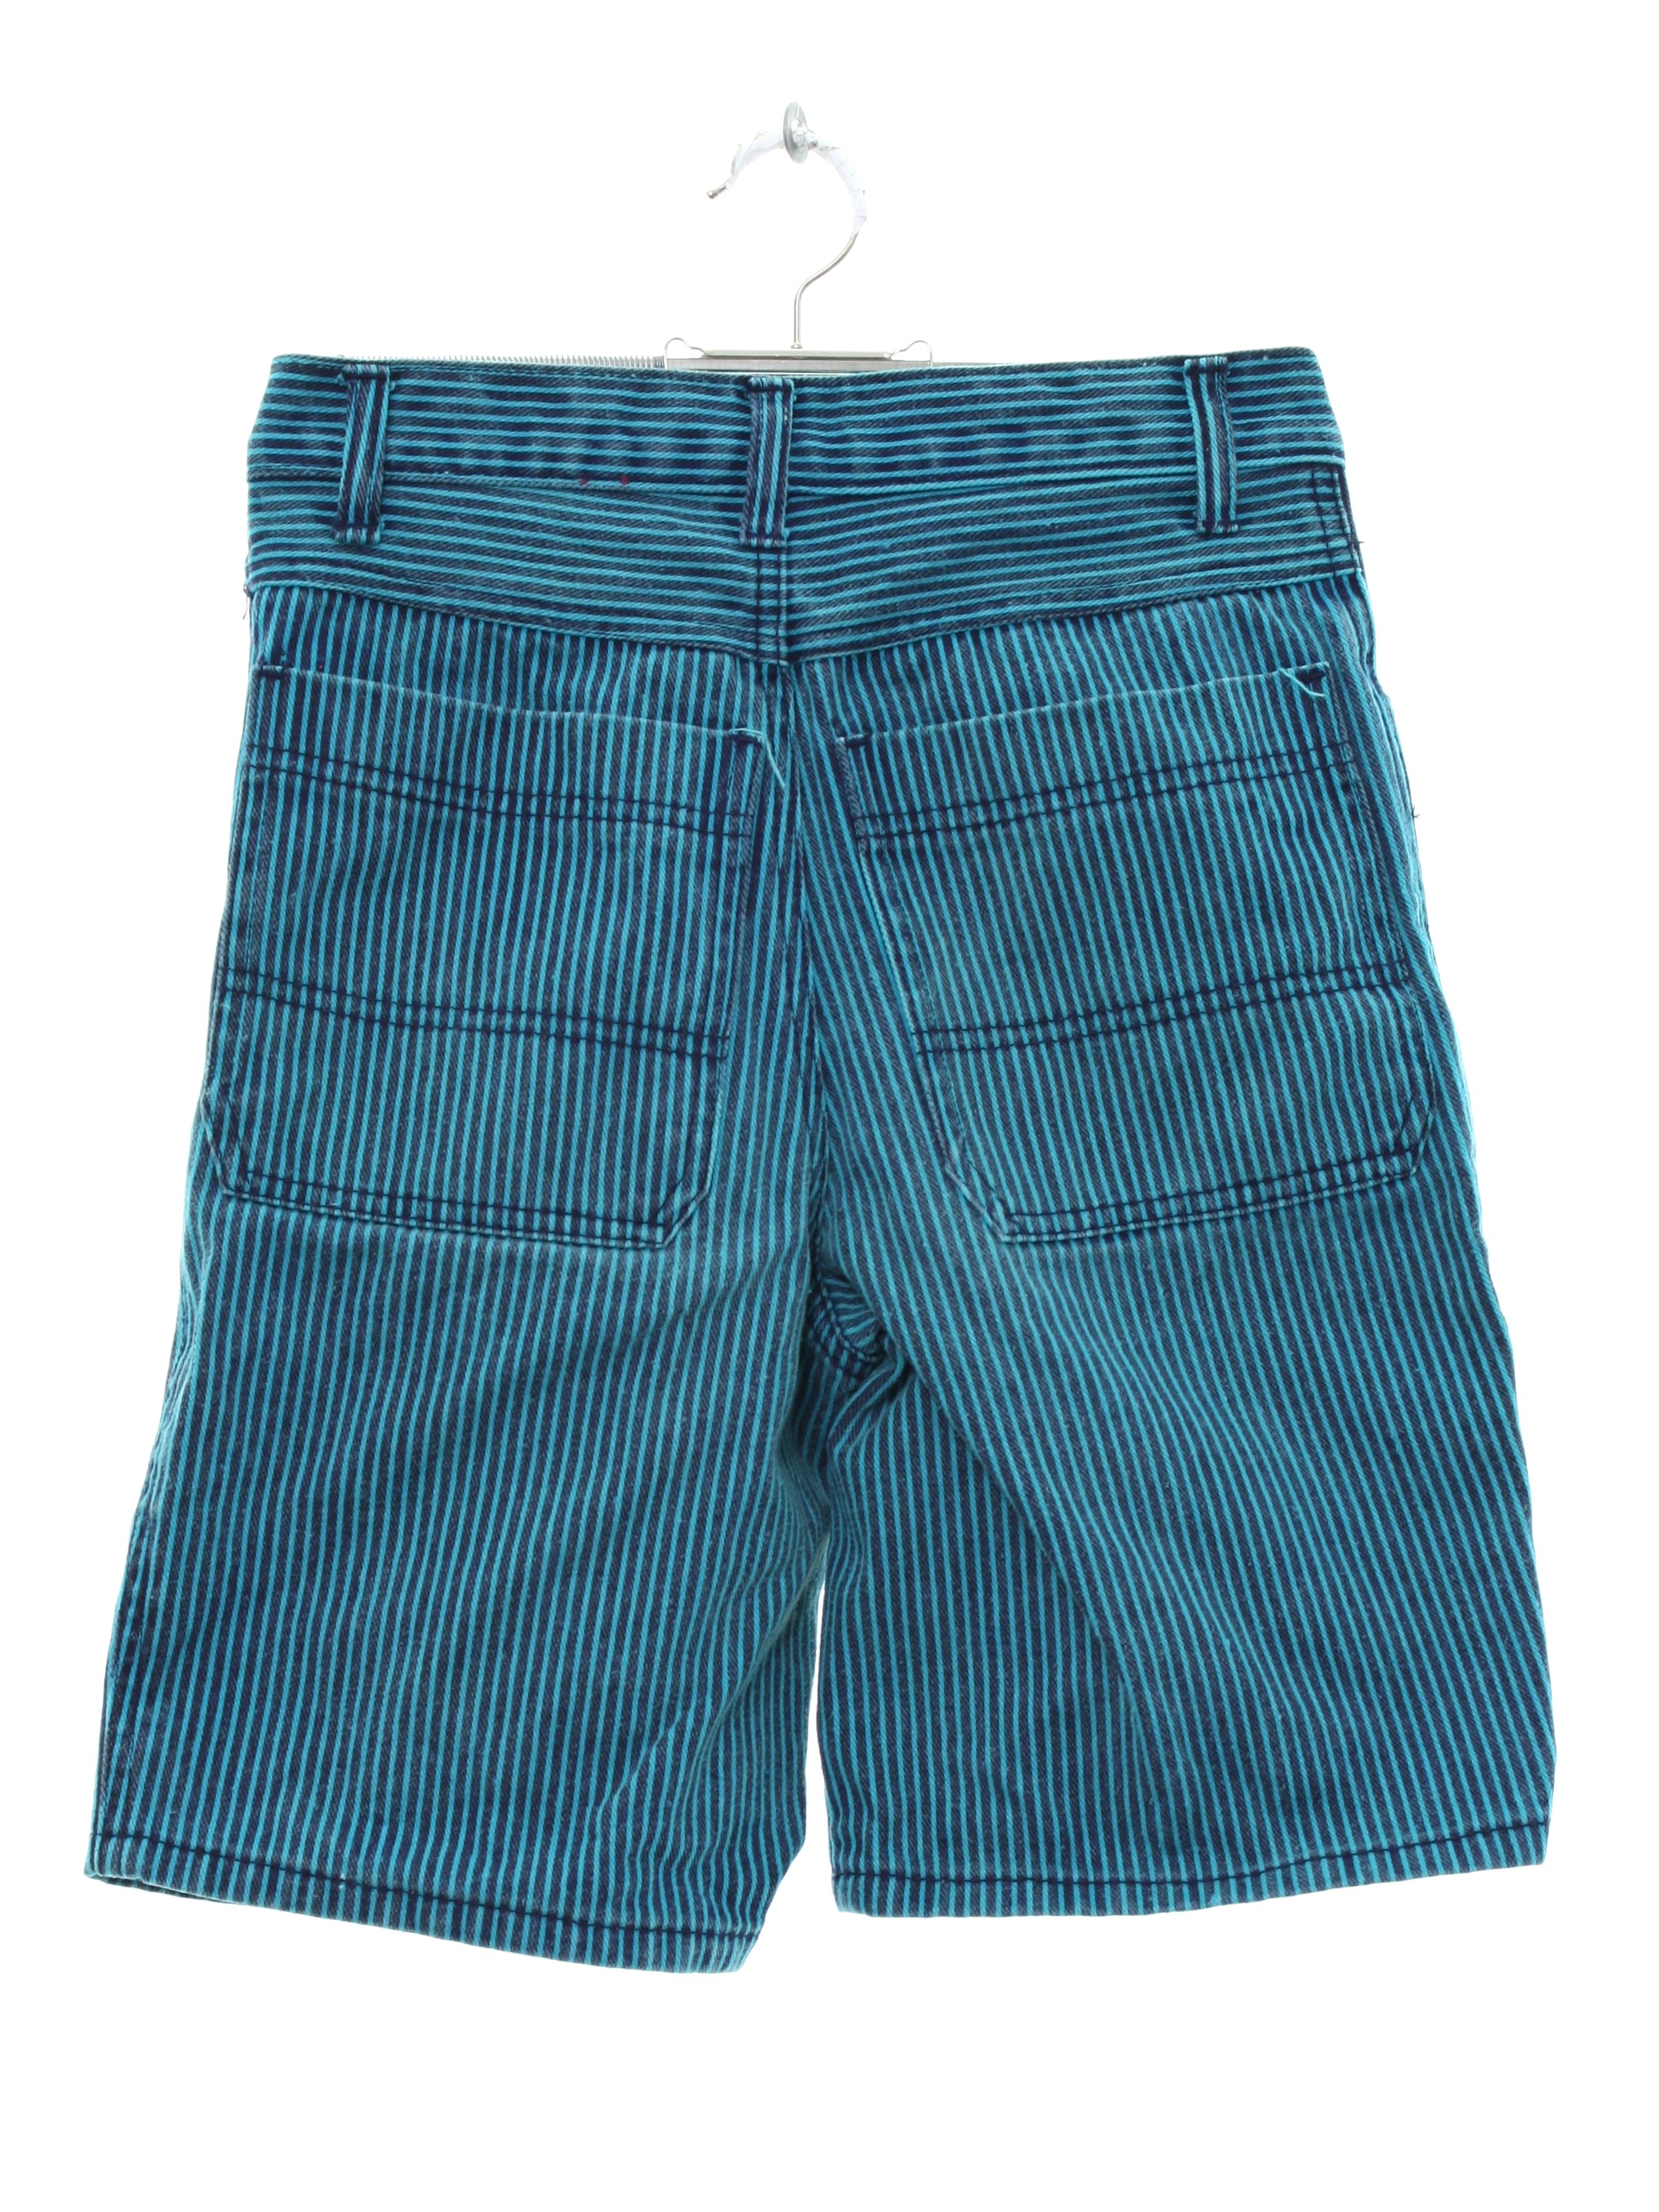 Vintage Yield Nineties Shorts: 90s -Yield- Womens/Childs teal and navy ...